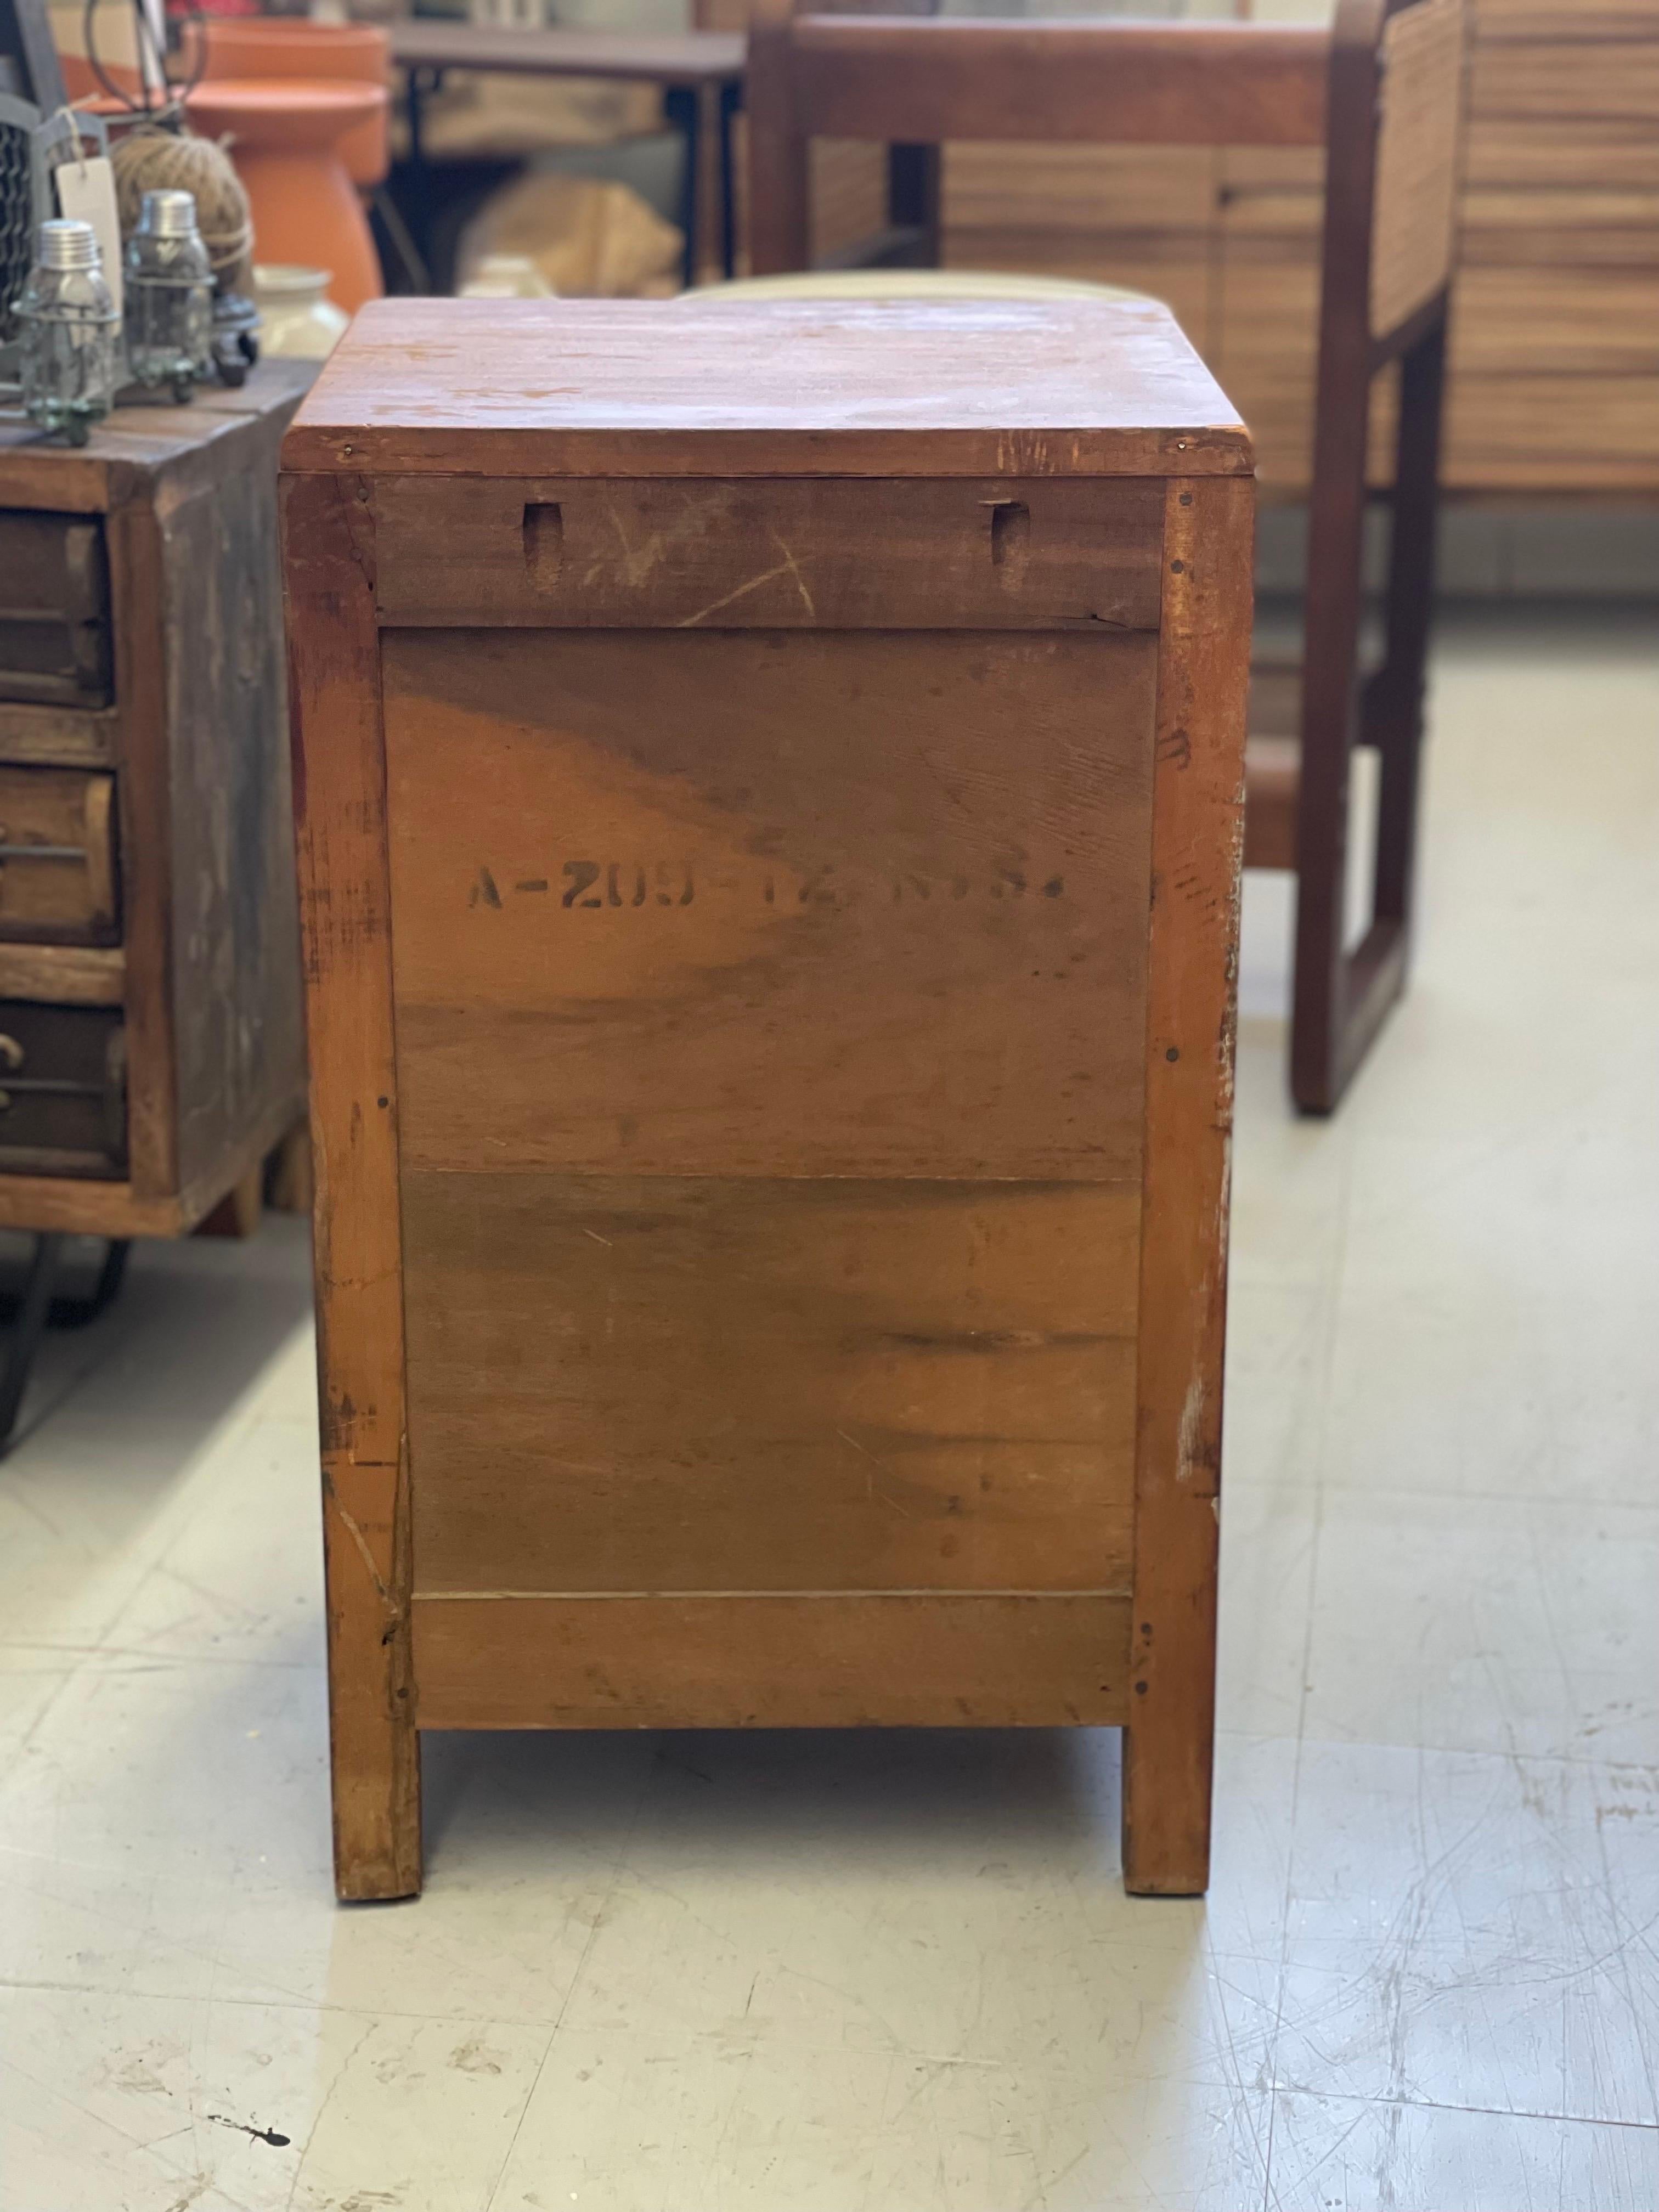 Vintage Mid-Century Modern Accent Table Dovetail Drawers Circa 1950s - 1970s. For Sale 2